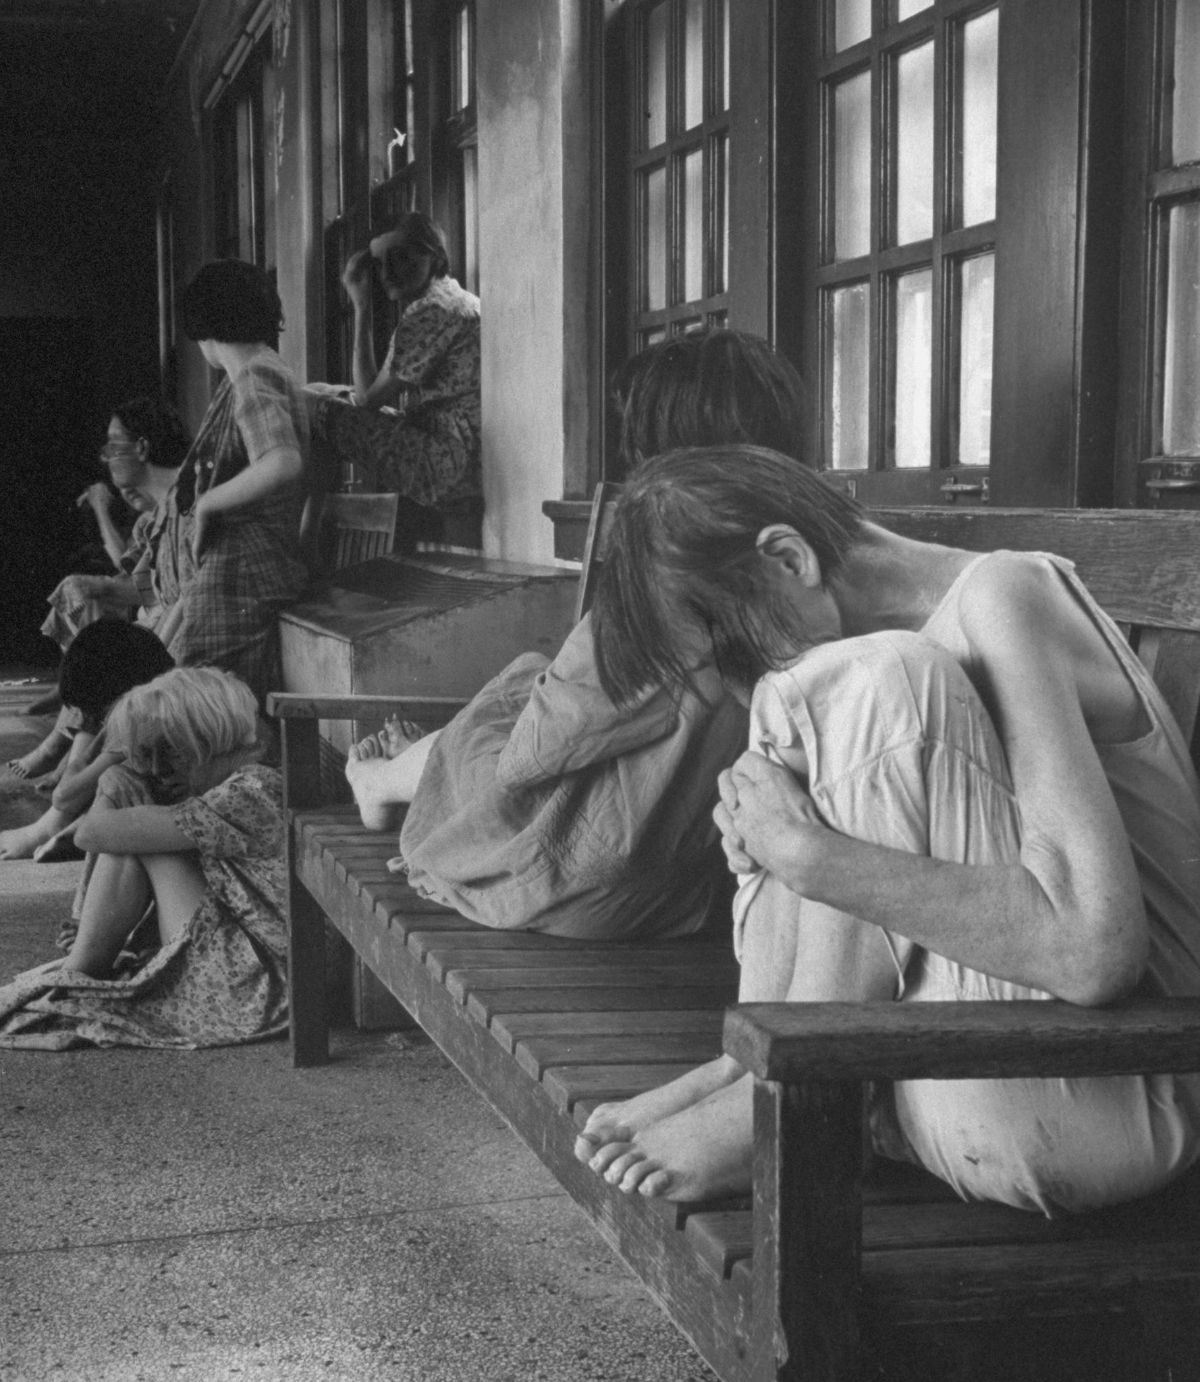 Haunting Photos Show the Bleak Conditions Faced by ...
 Insane Asylum Patients Photos